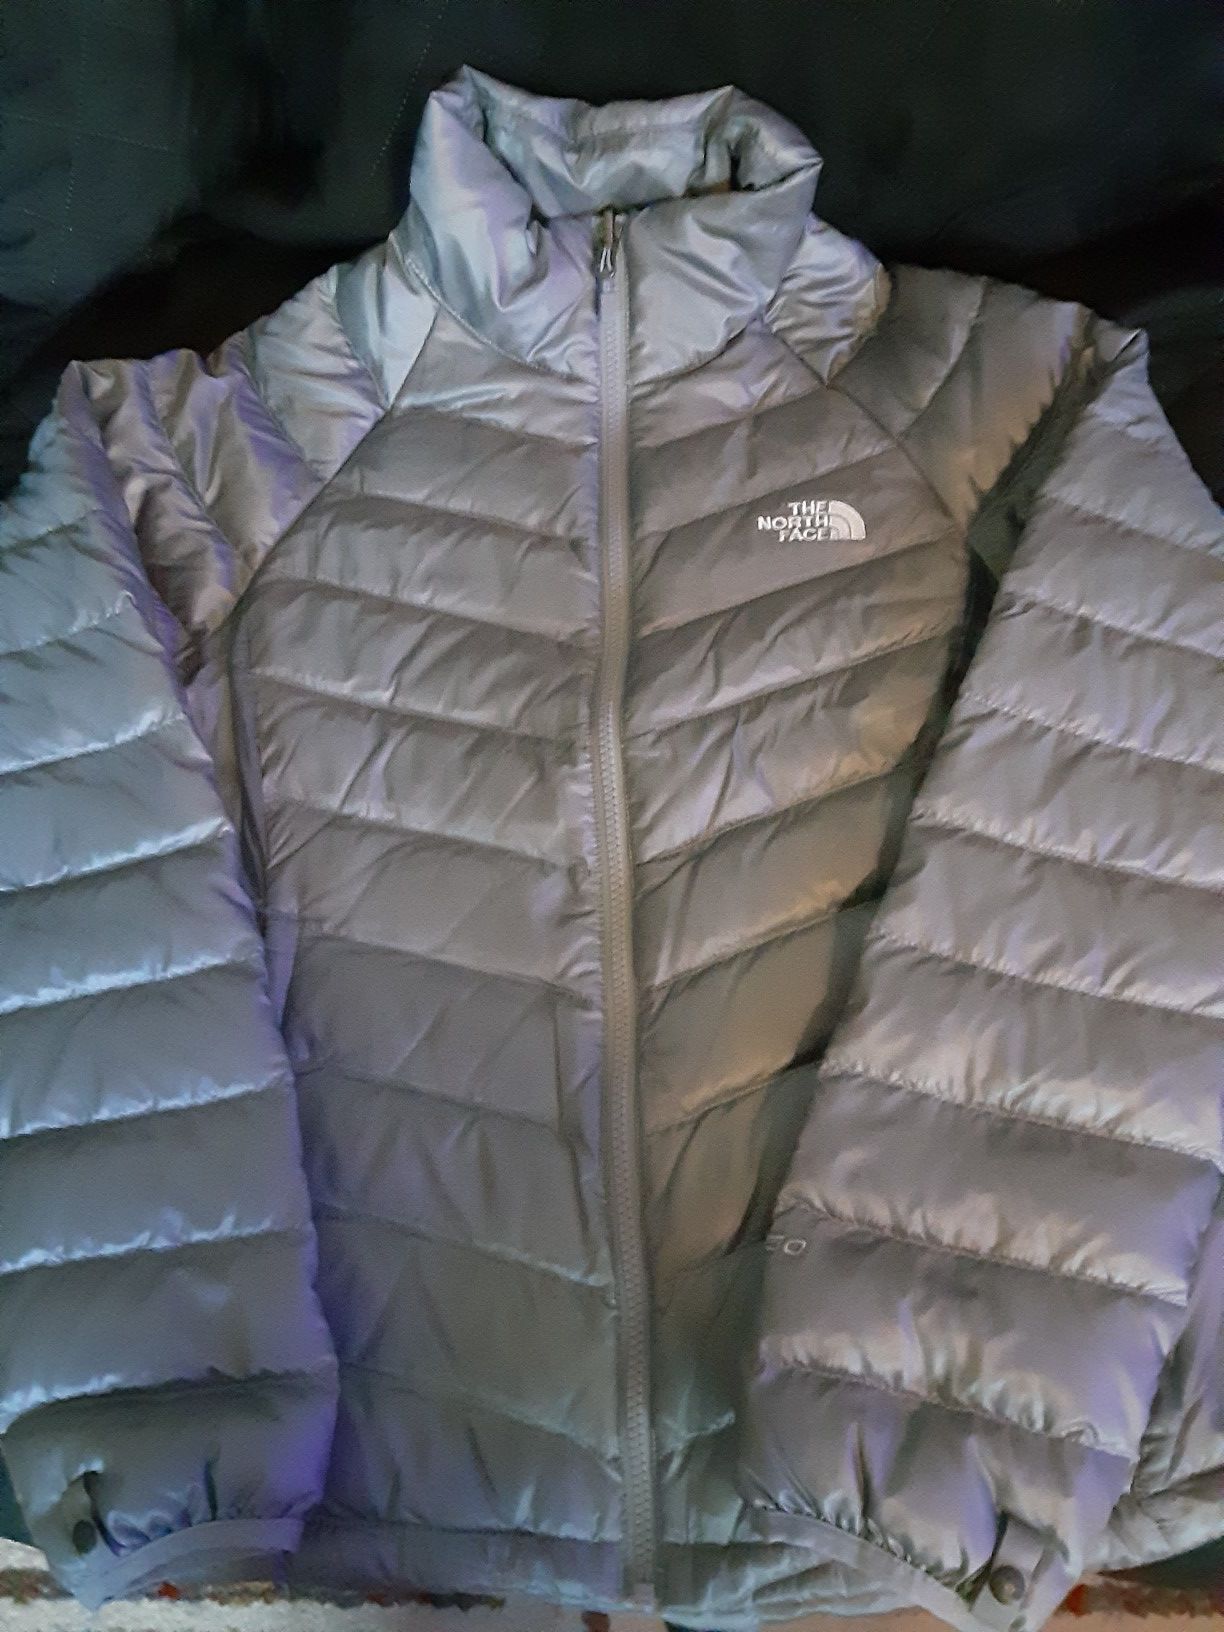 New with tags north face size small